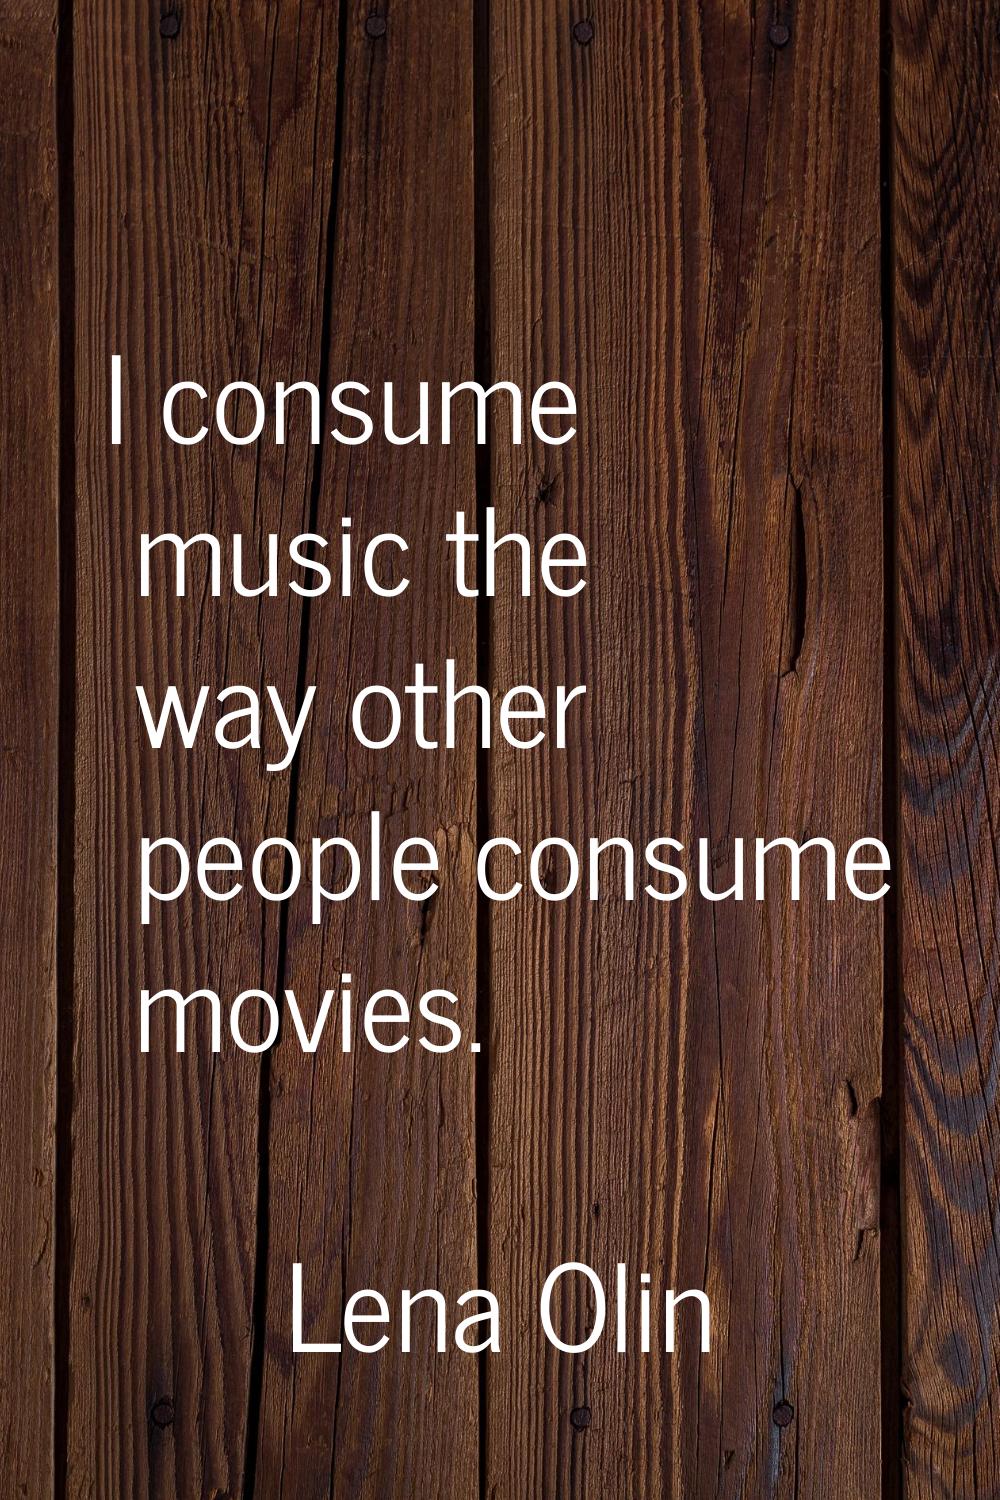 I consume music the way other people consume movies.